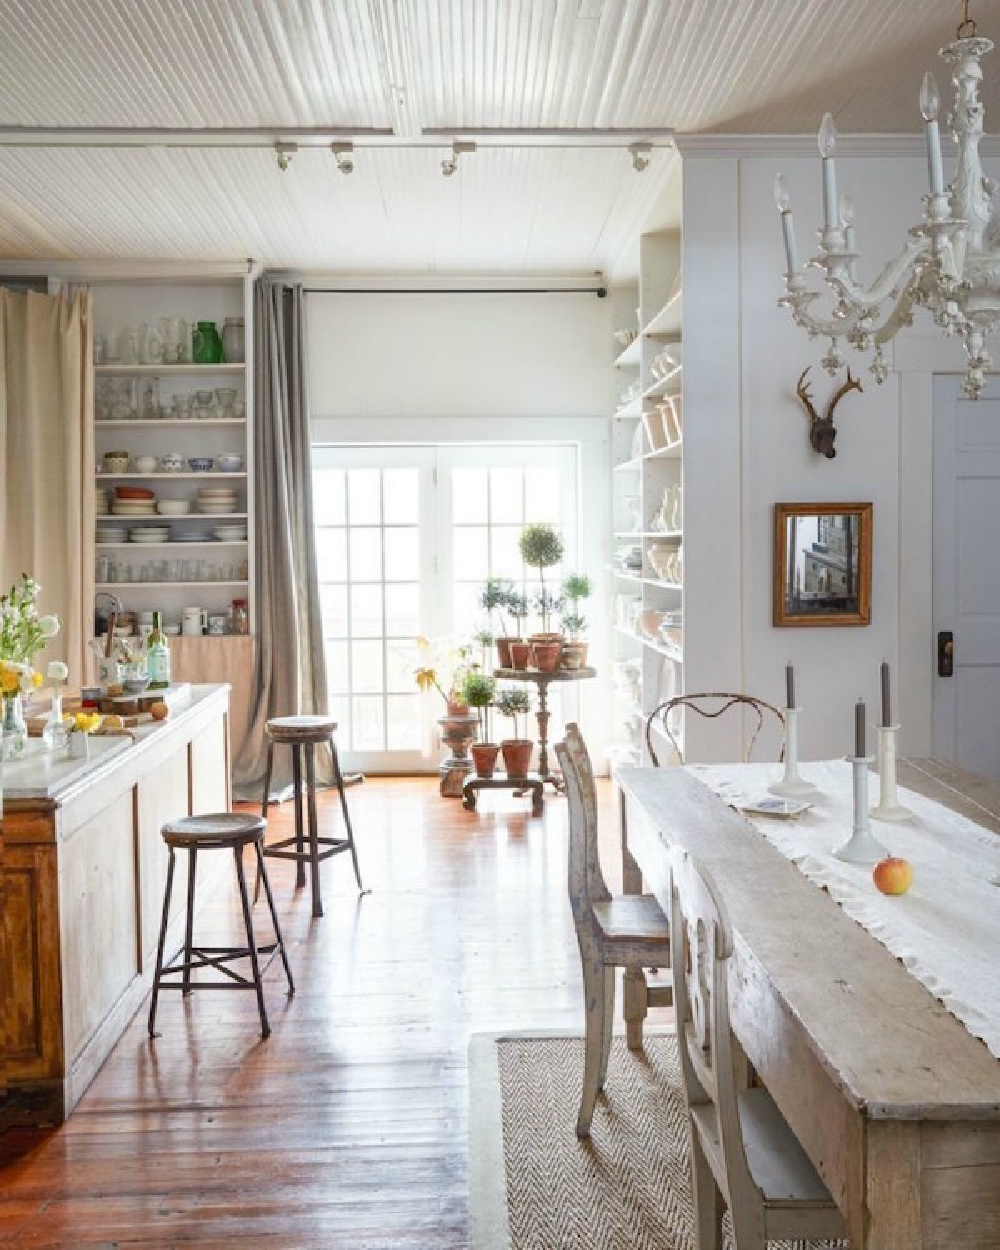 Design: Jocelyn Sinauer. Quiet and humble beauty in a lovely country kitchen and dining area with shabby chic vintage style. A chunky antique farm table mixes with antique mismatched chairs and a white chandelier. #shabbychic #countrykitchen #beadboardceiling